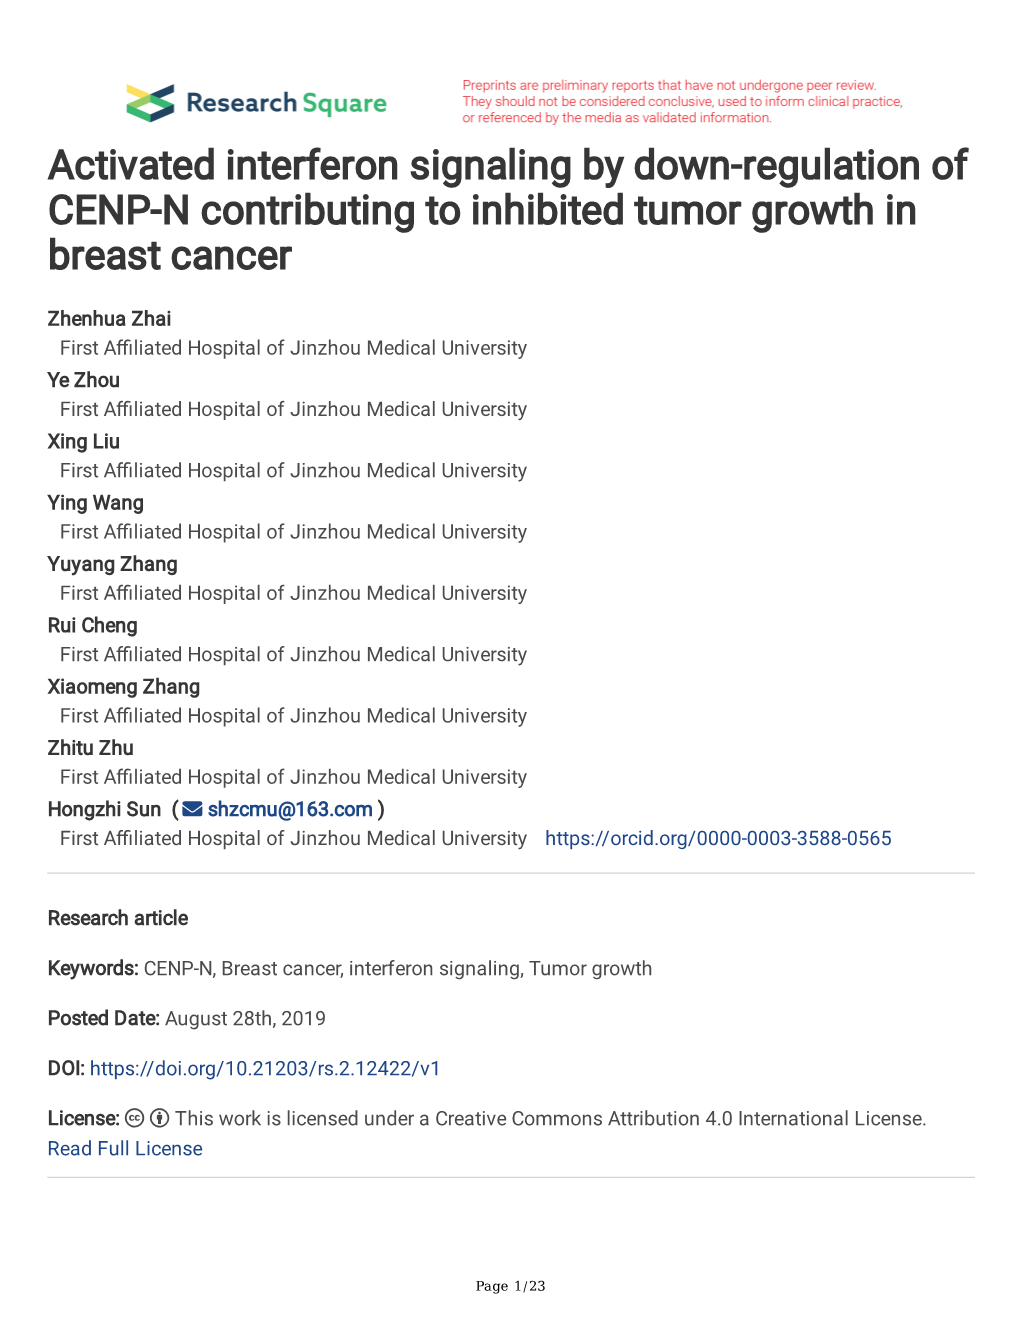 Activated Interferon Signaling by Down-Regulation of CENP-N Contributing to Inhibited Tumor Growth in Breast Cancer